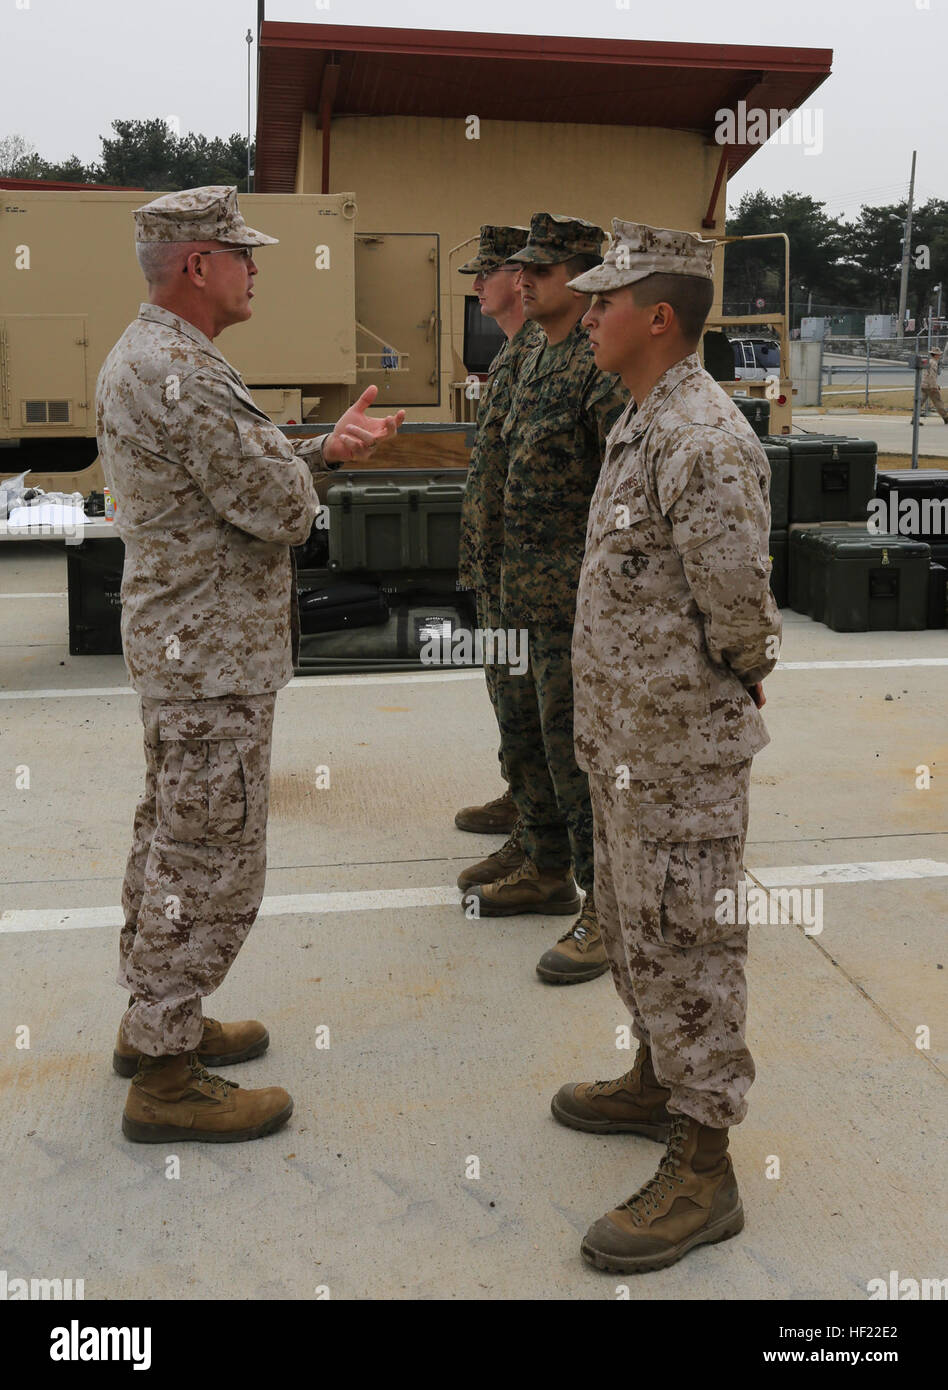 Maj. Gen. James S. Hartsell, Commanding General of 4th Marine Division, awards a coin to three Marines with Delta Battery, 2d Battalion, 14th Marine Regiment during exercise Ssang Yong, Pohang, South Korea,  April 3, 2014. Coin award, Ssang Yong 14 140403-M-GZ082-007 Stock Photo